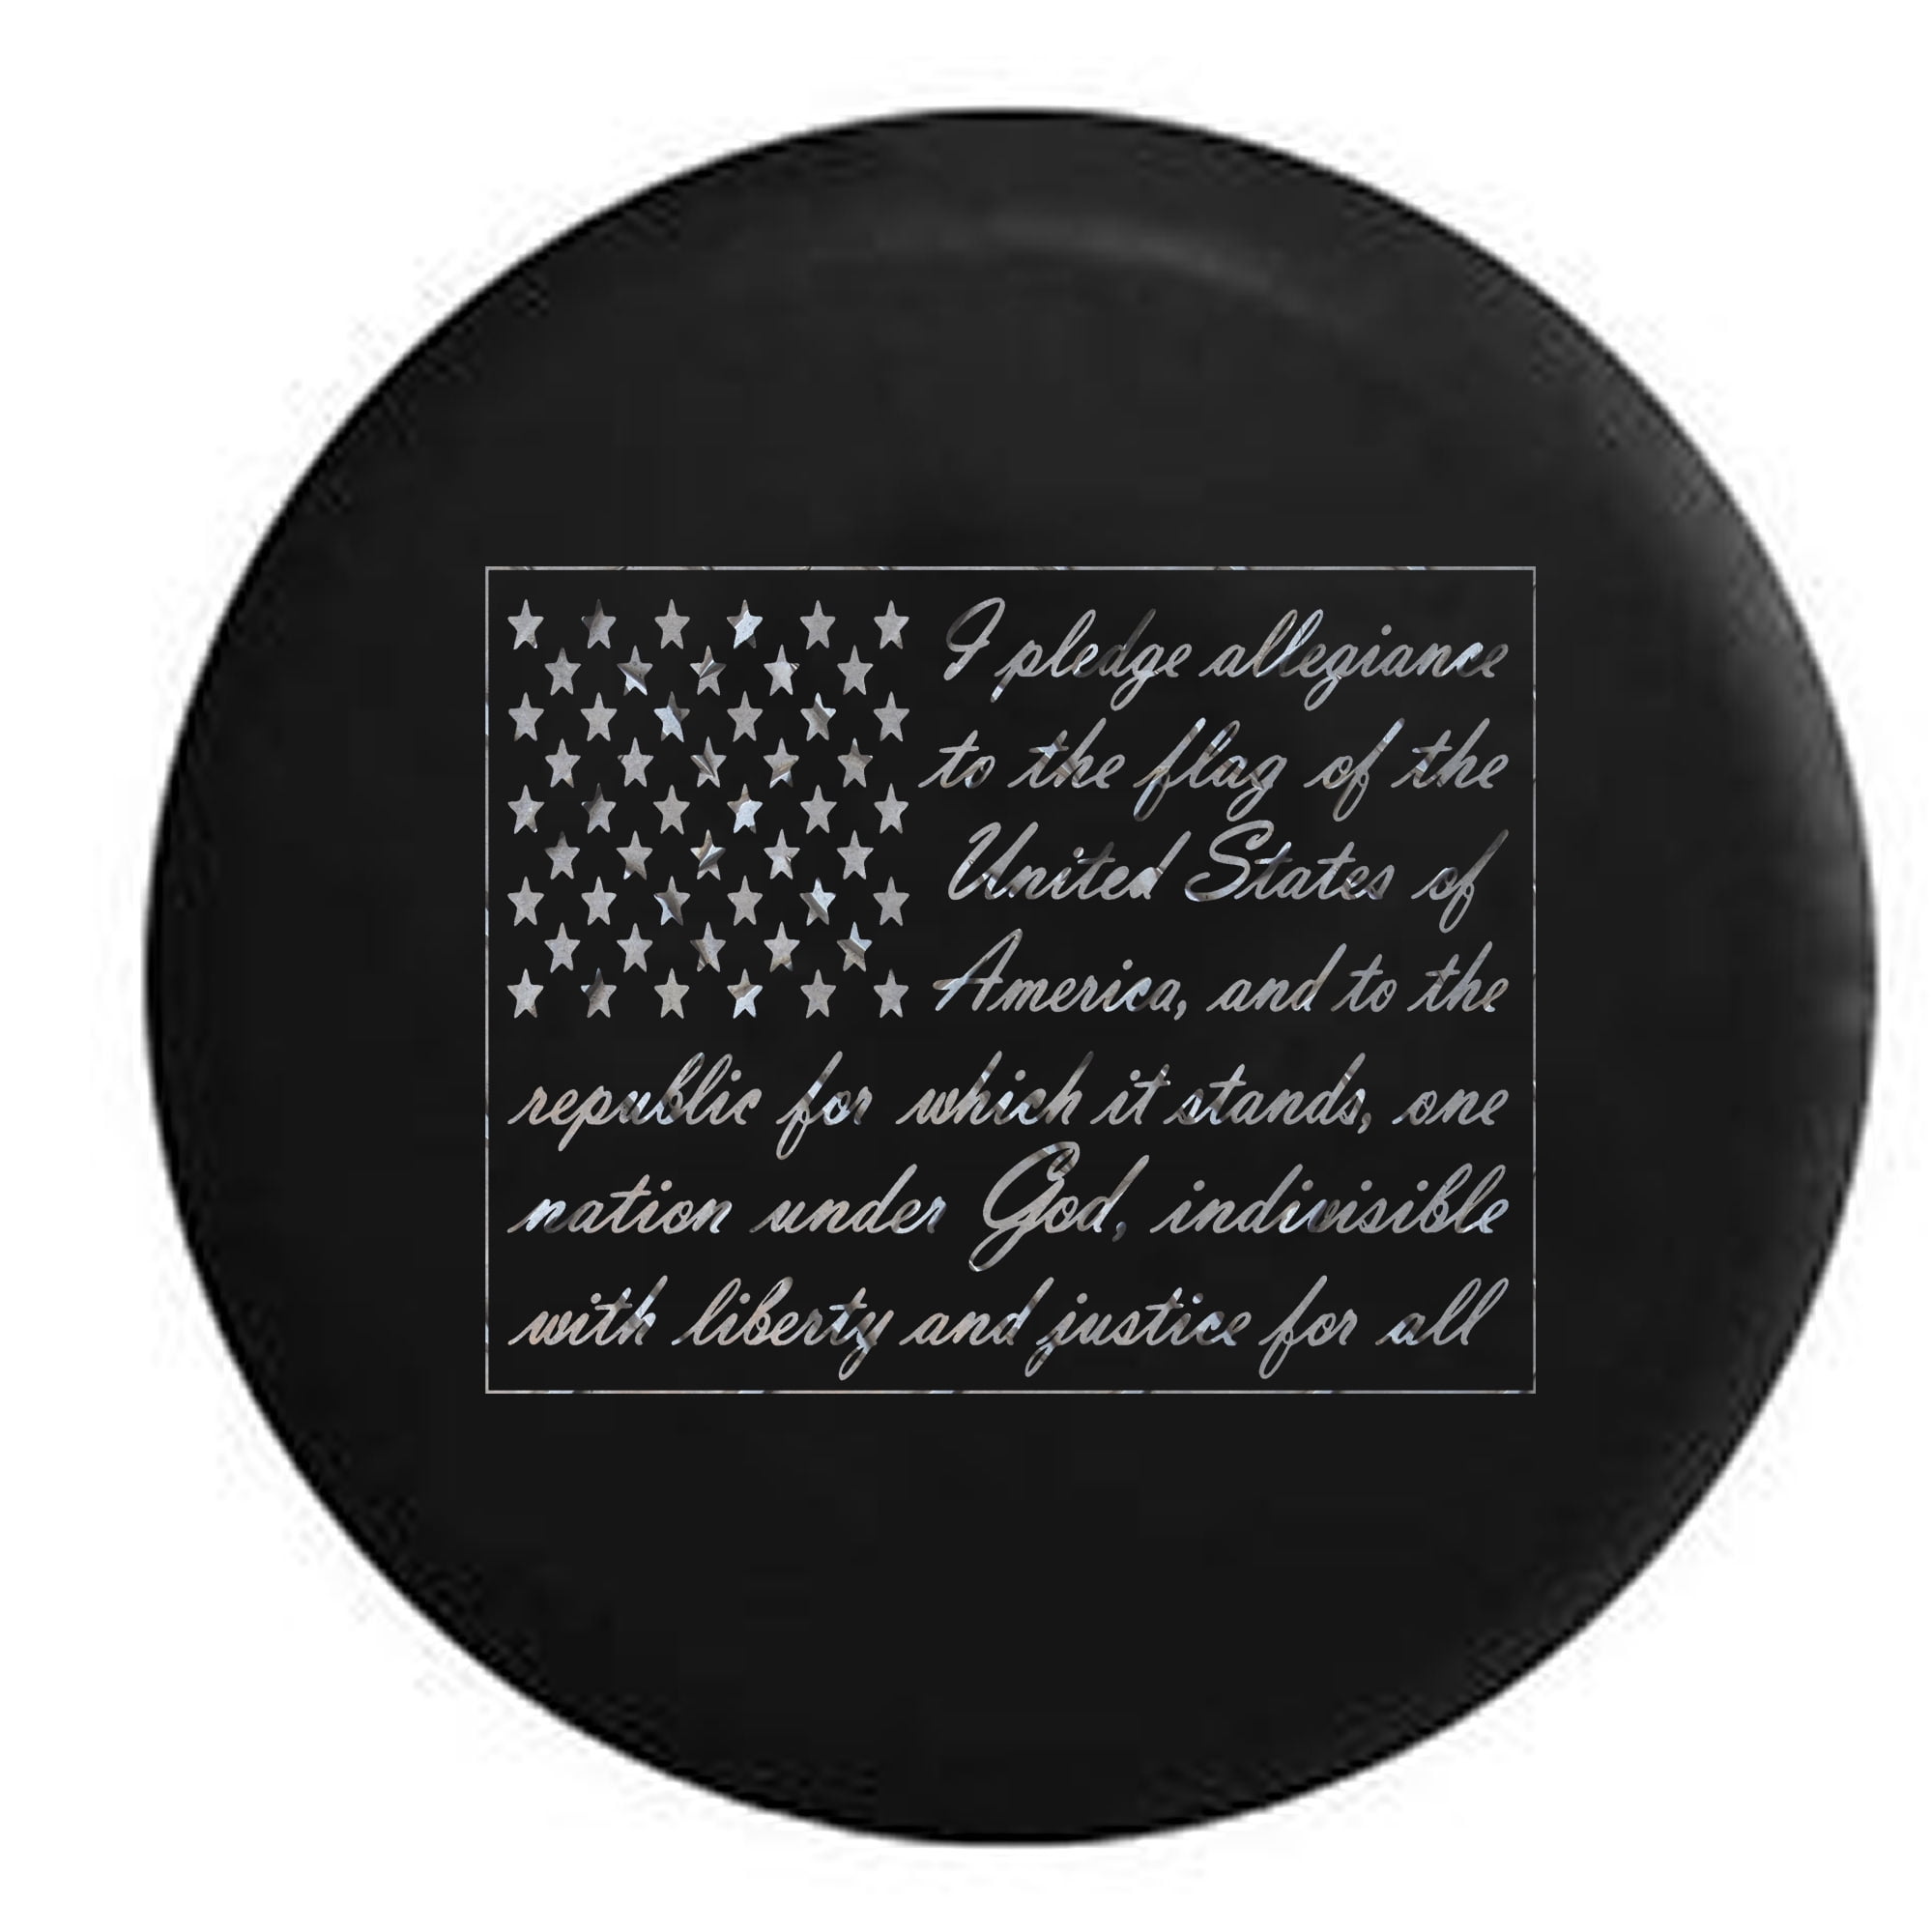 Car Tire Covers We The People American Flag Black 30 to 31 Inch - 1